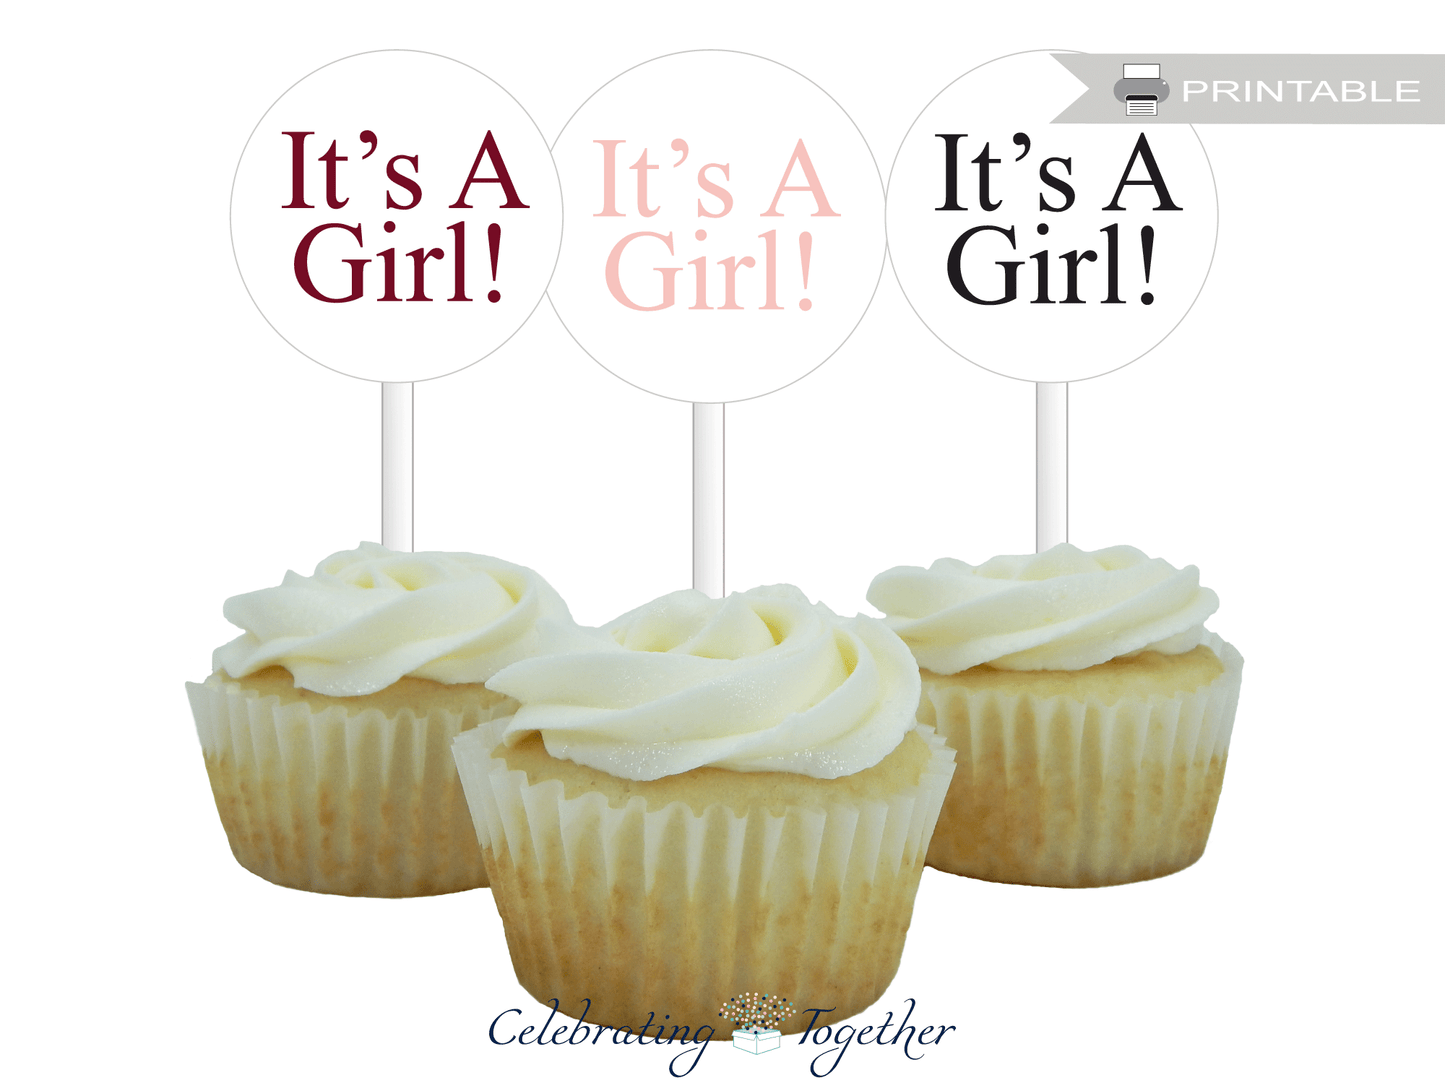 printable it's a girl cupcake toppers - baby shower decorations